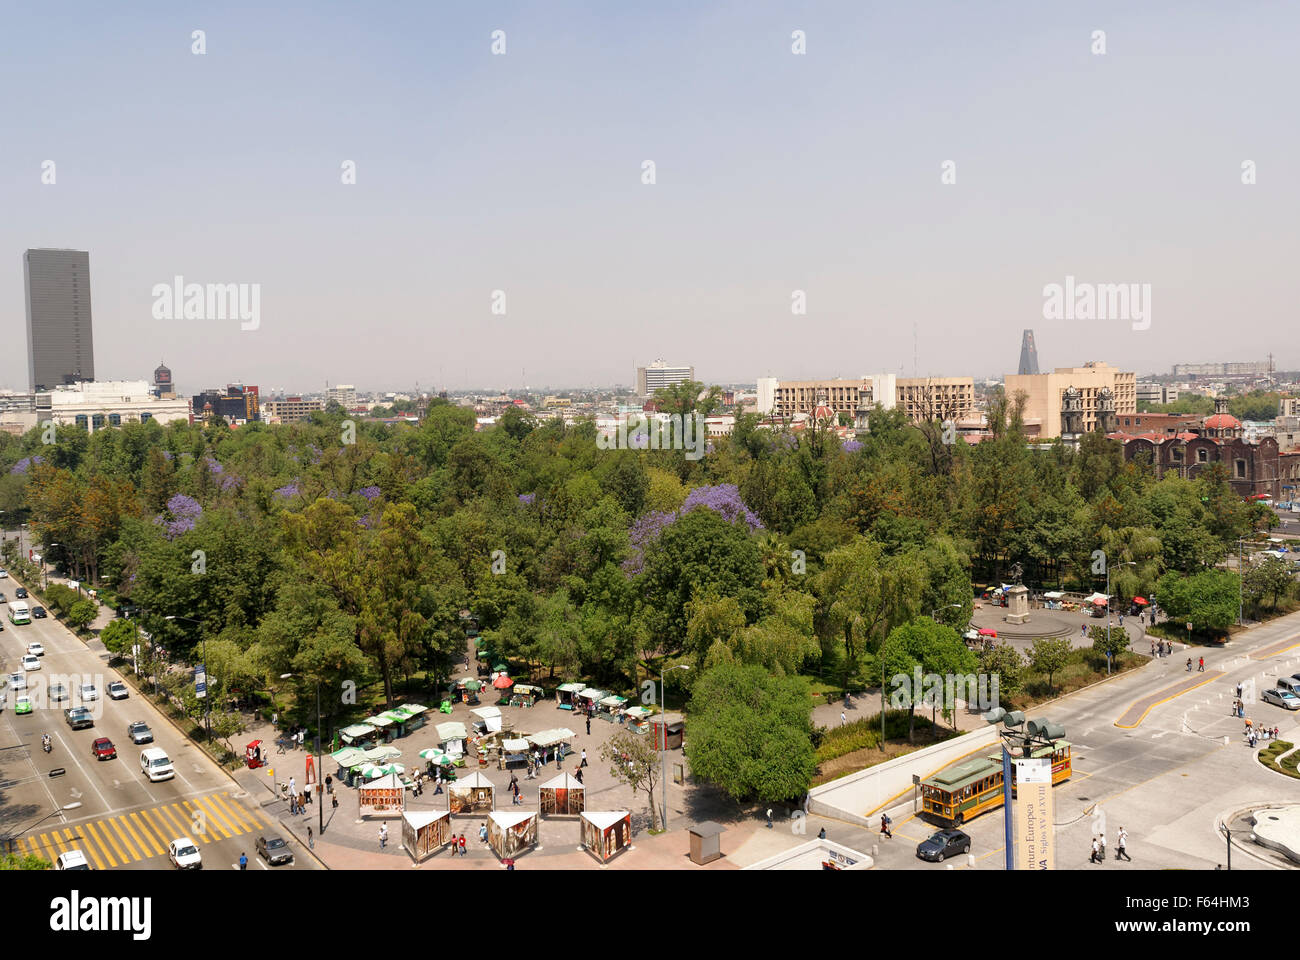 View of outdoor market and the Alameda Central park from above, Mexico City Stock Photo